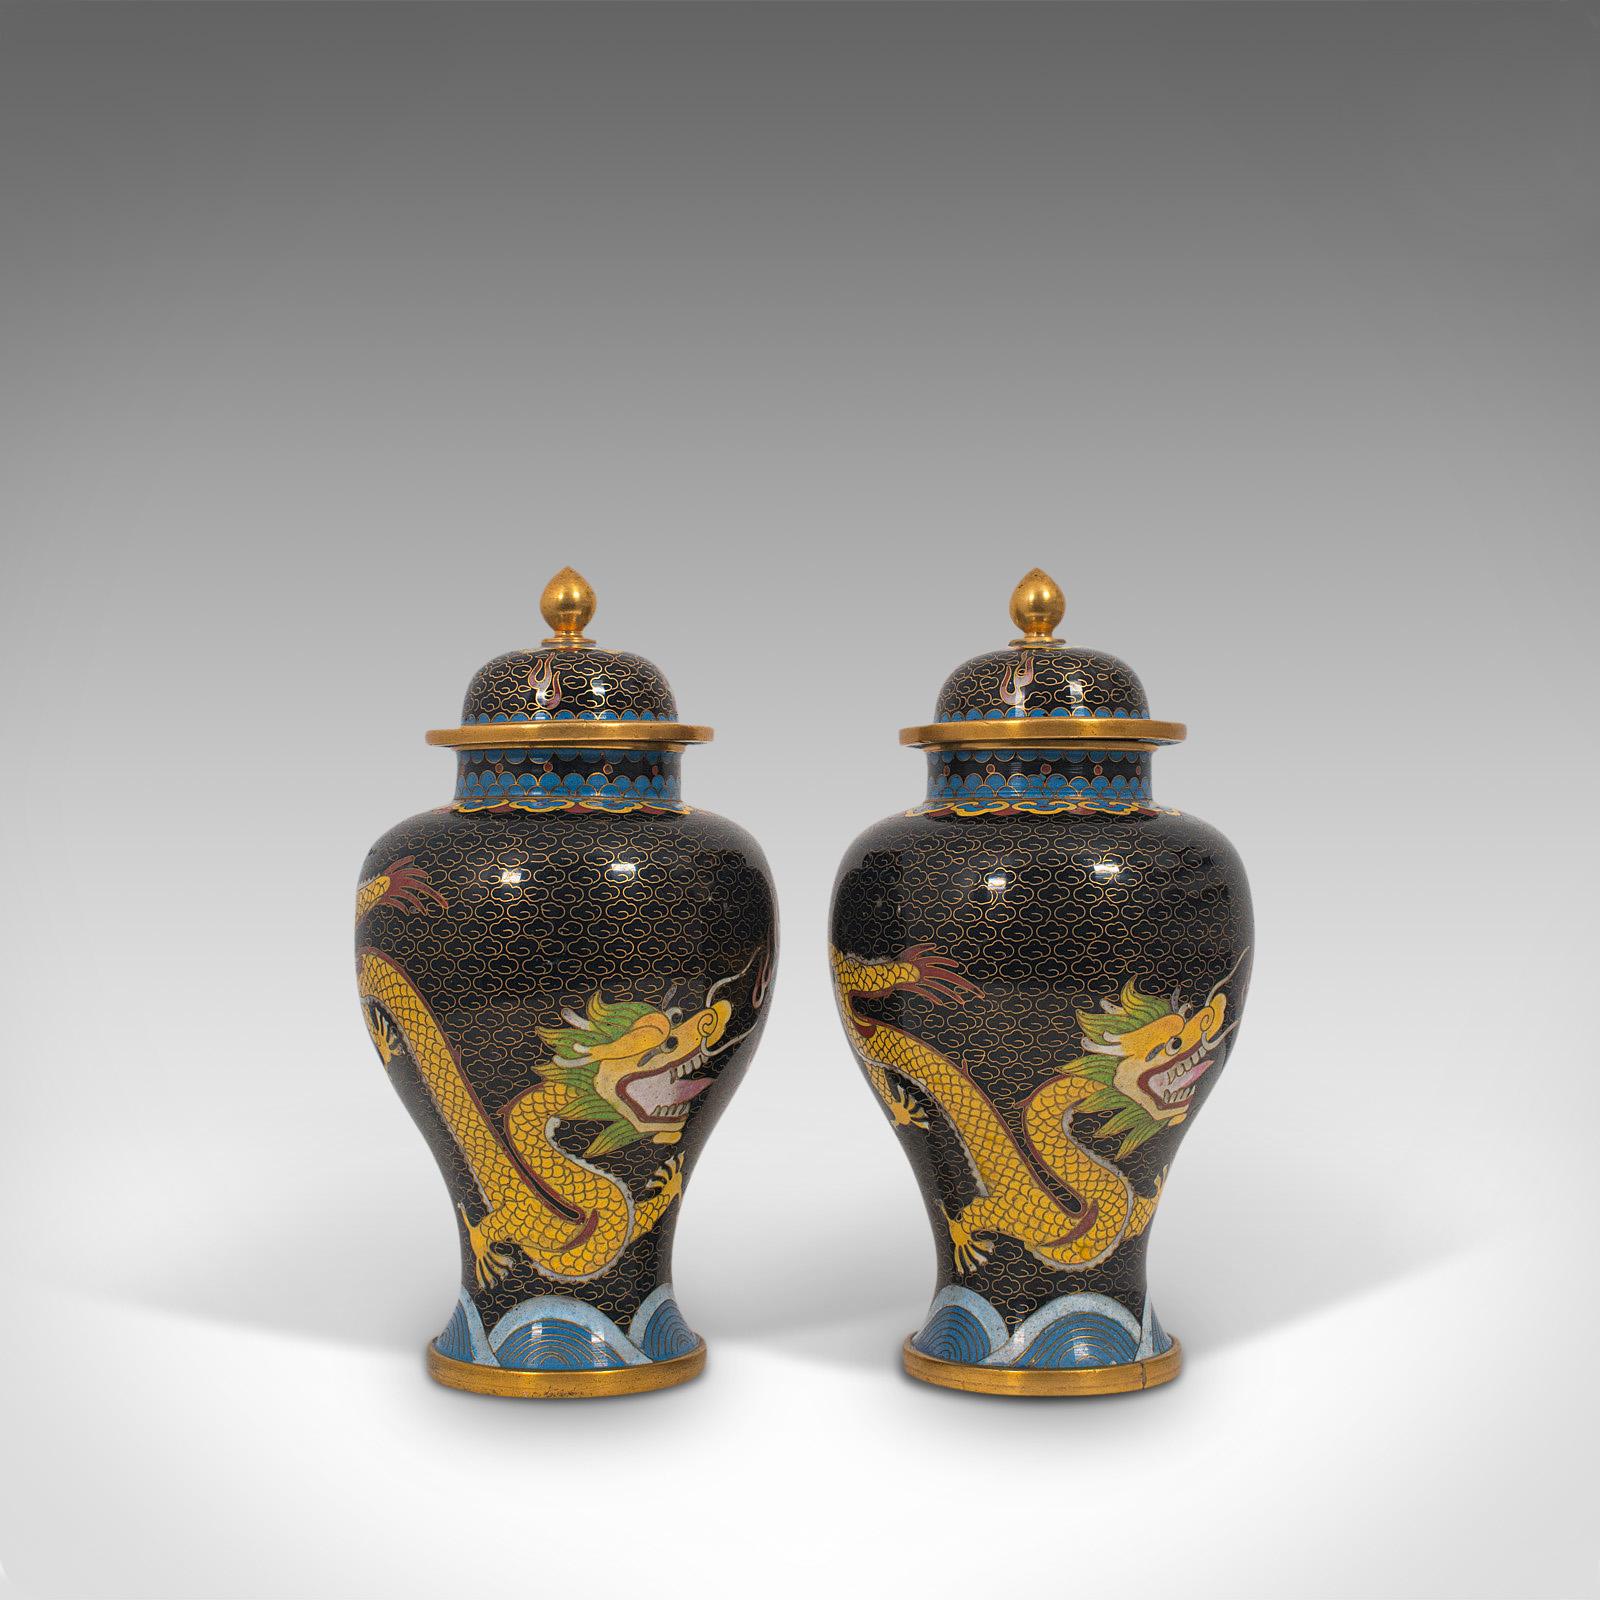 Antique Decorative Spice Jars, Chinese, Cloisonné, Baluster Urn circa 1900, Pair In Good Condition For Sale In Hele, Devon, GB